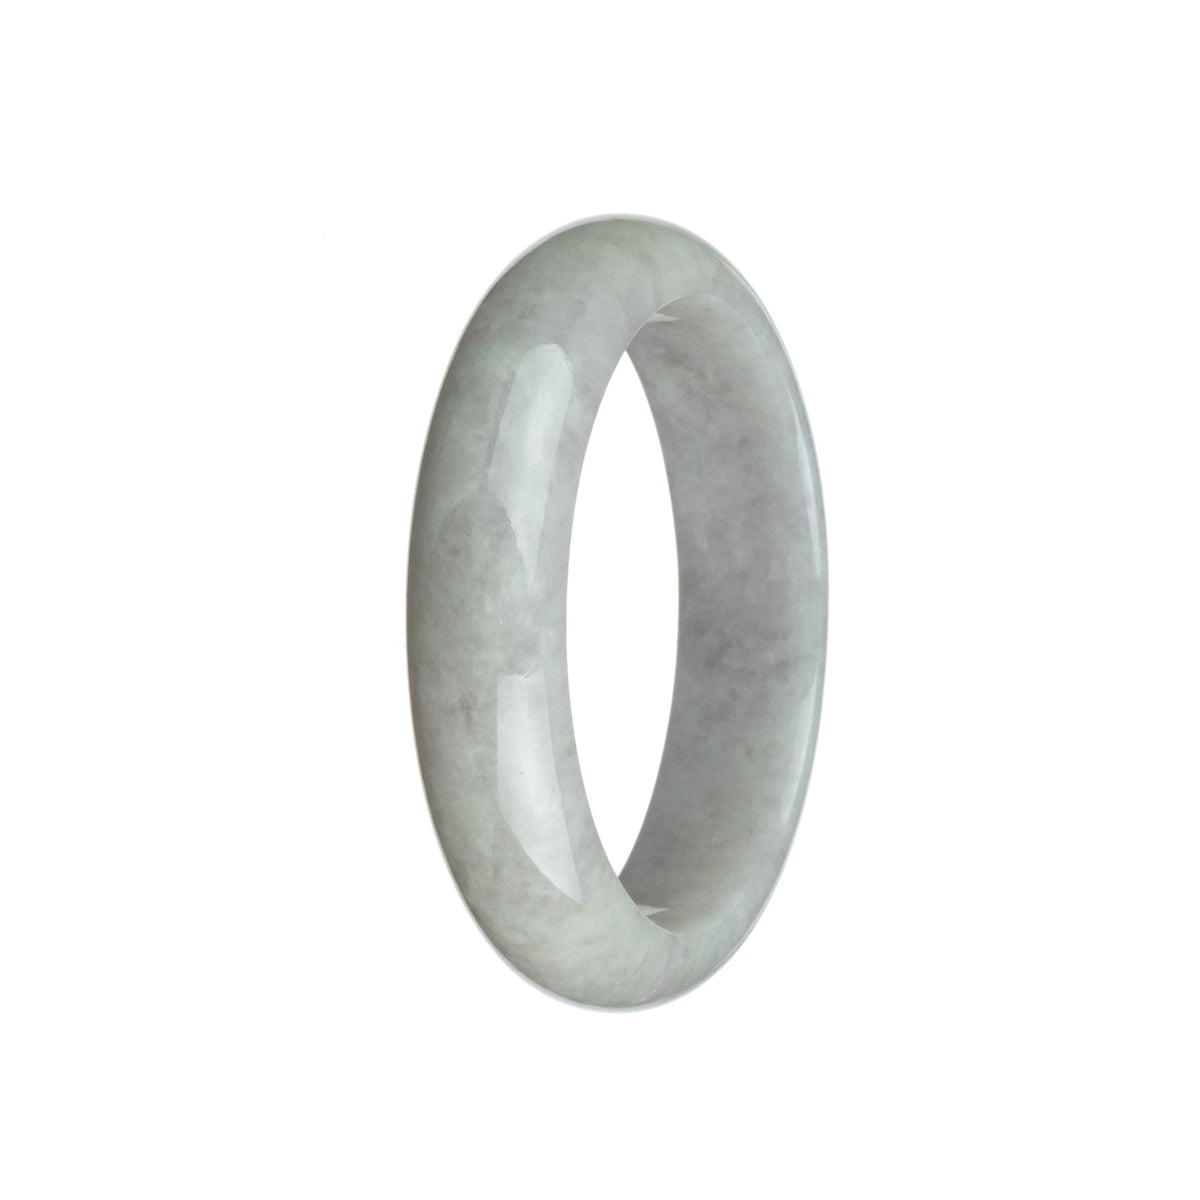 A half moon-shaped lavender jade bangle made of genuine untreated jadeite jade, measuring 58mm. Perfect for a stylish and unique accessory.